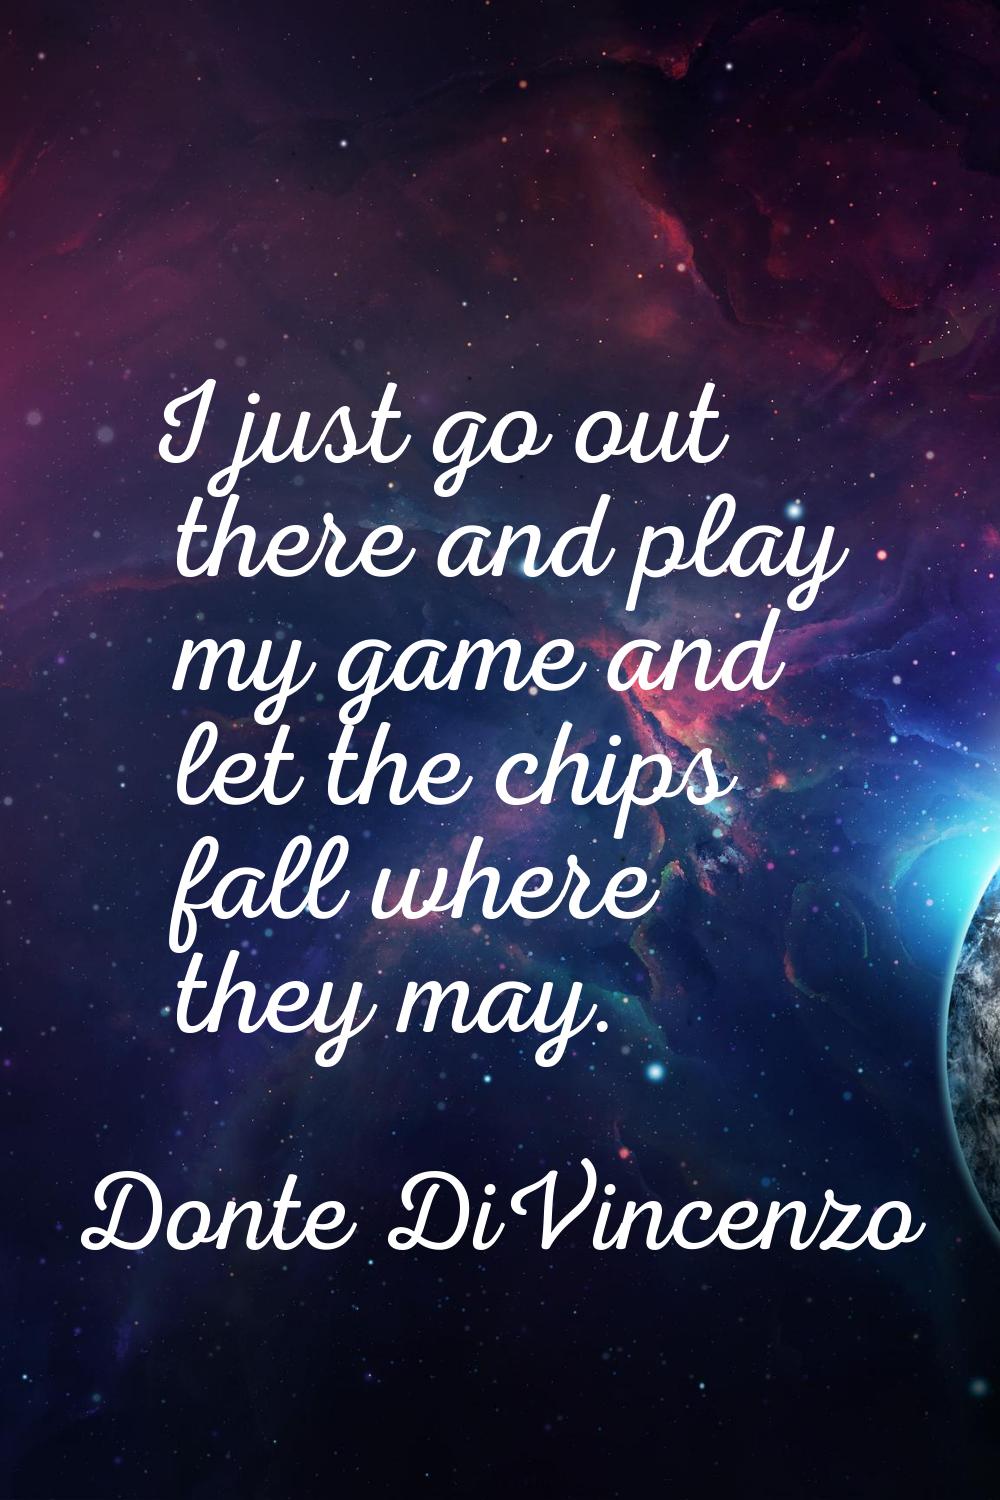 I just go out there and play my game and let the chips fall where they may.